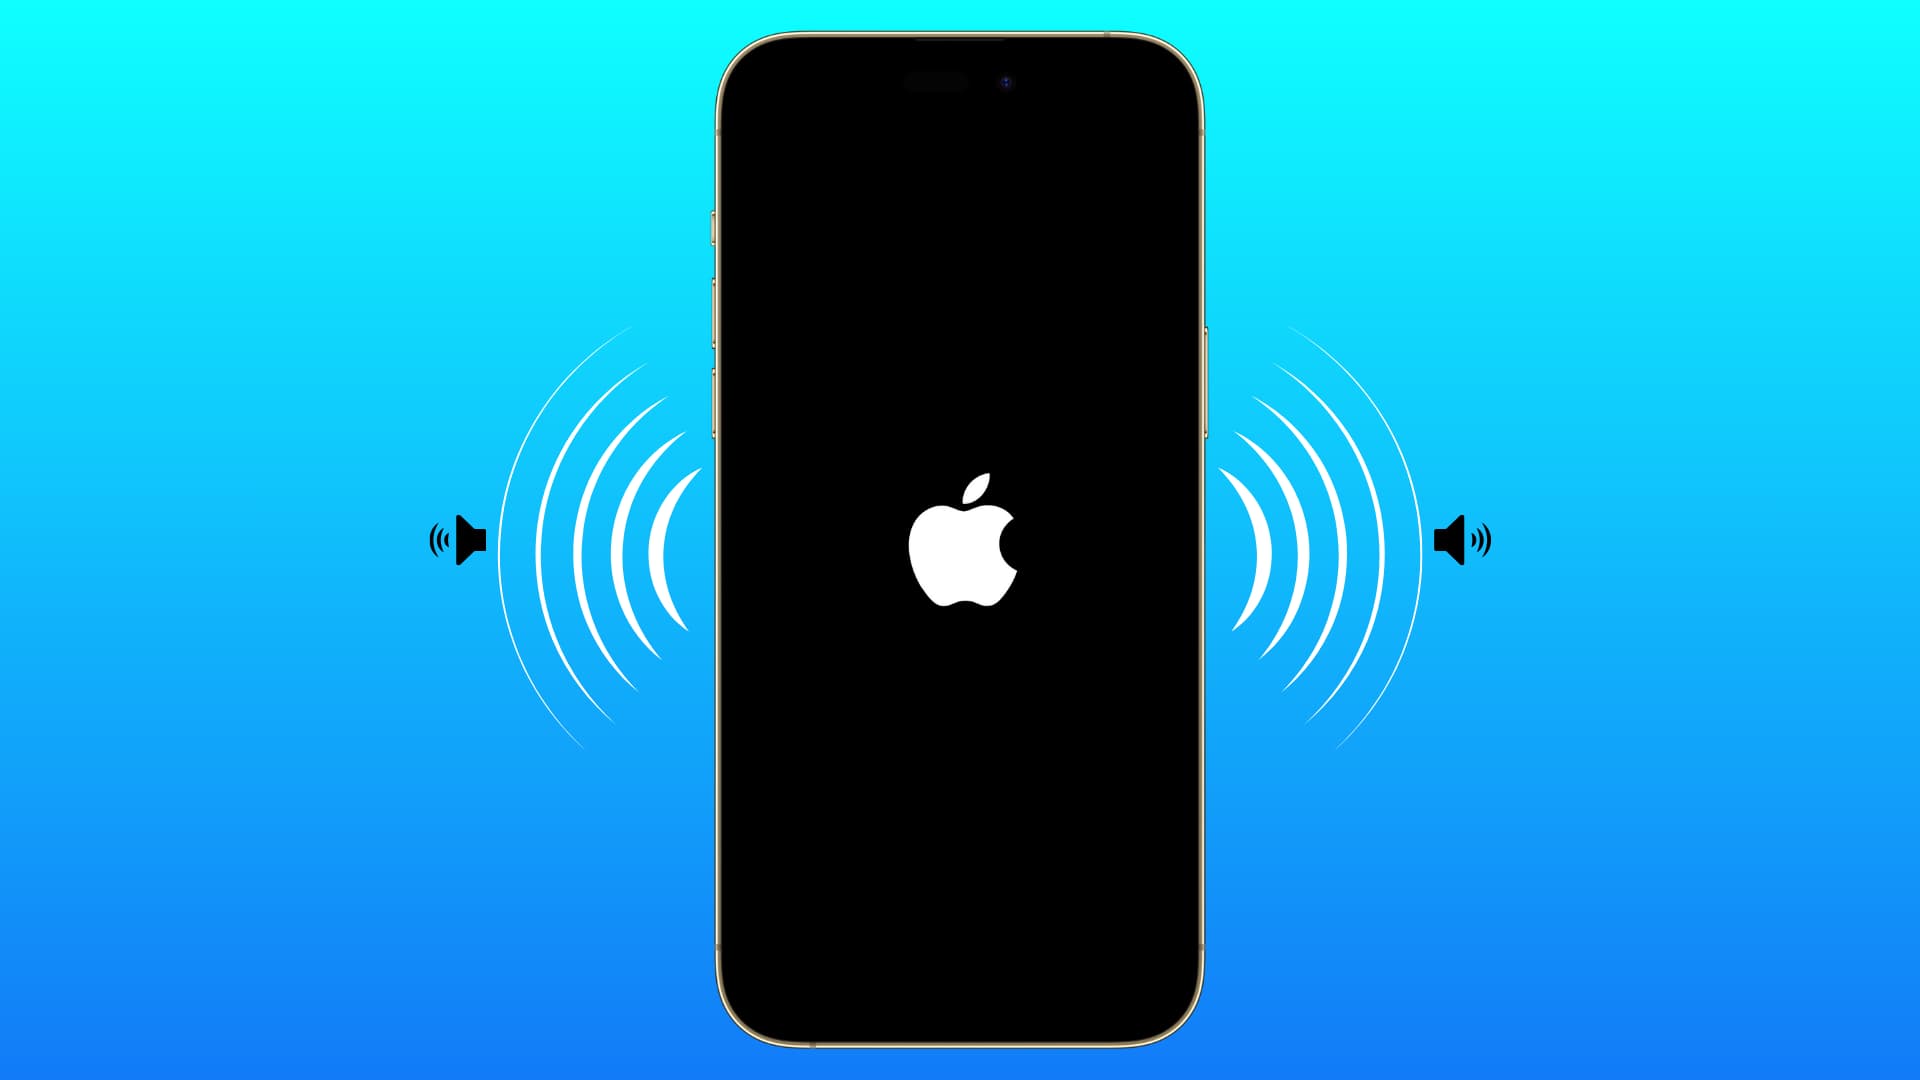 How to have your iPhone play a sound when turning it on and off